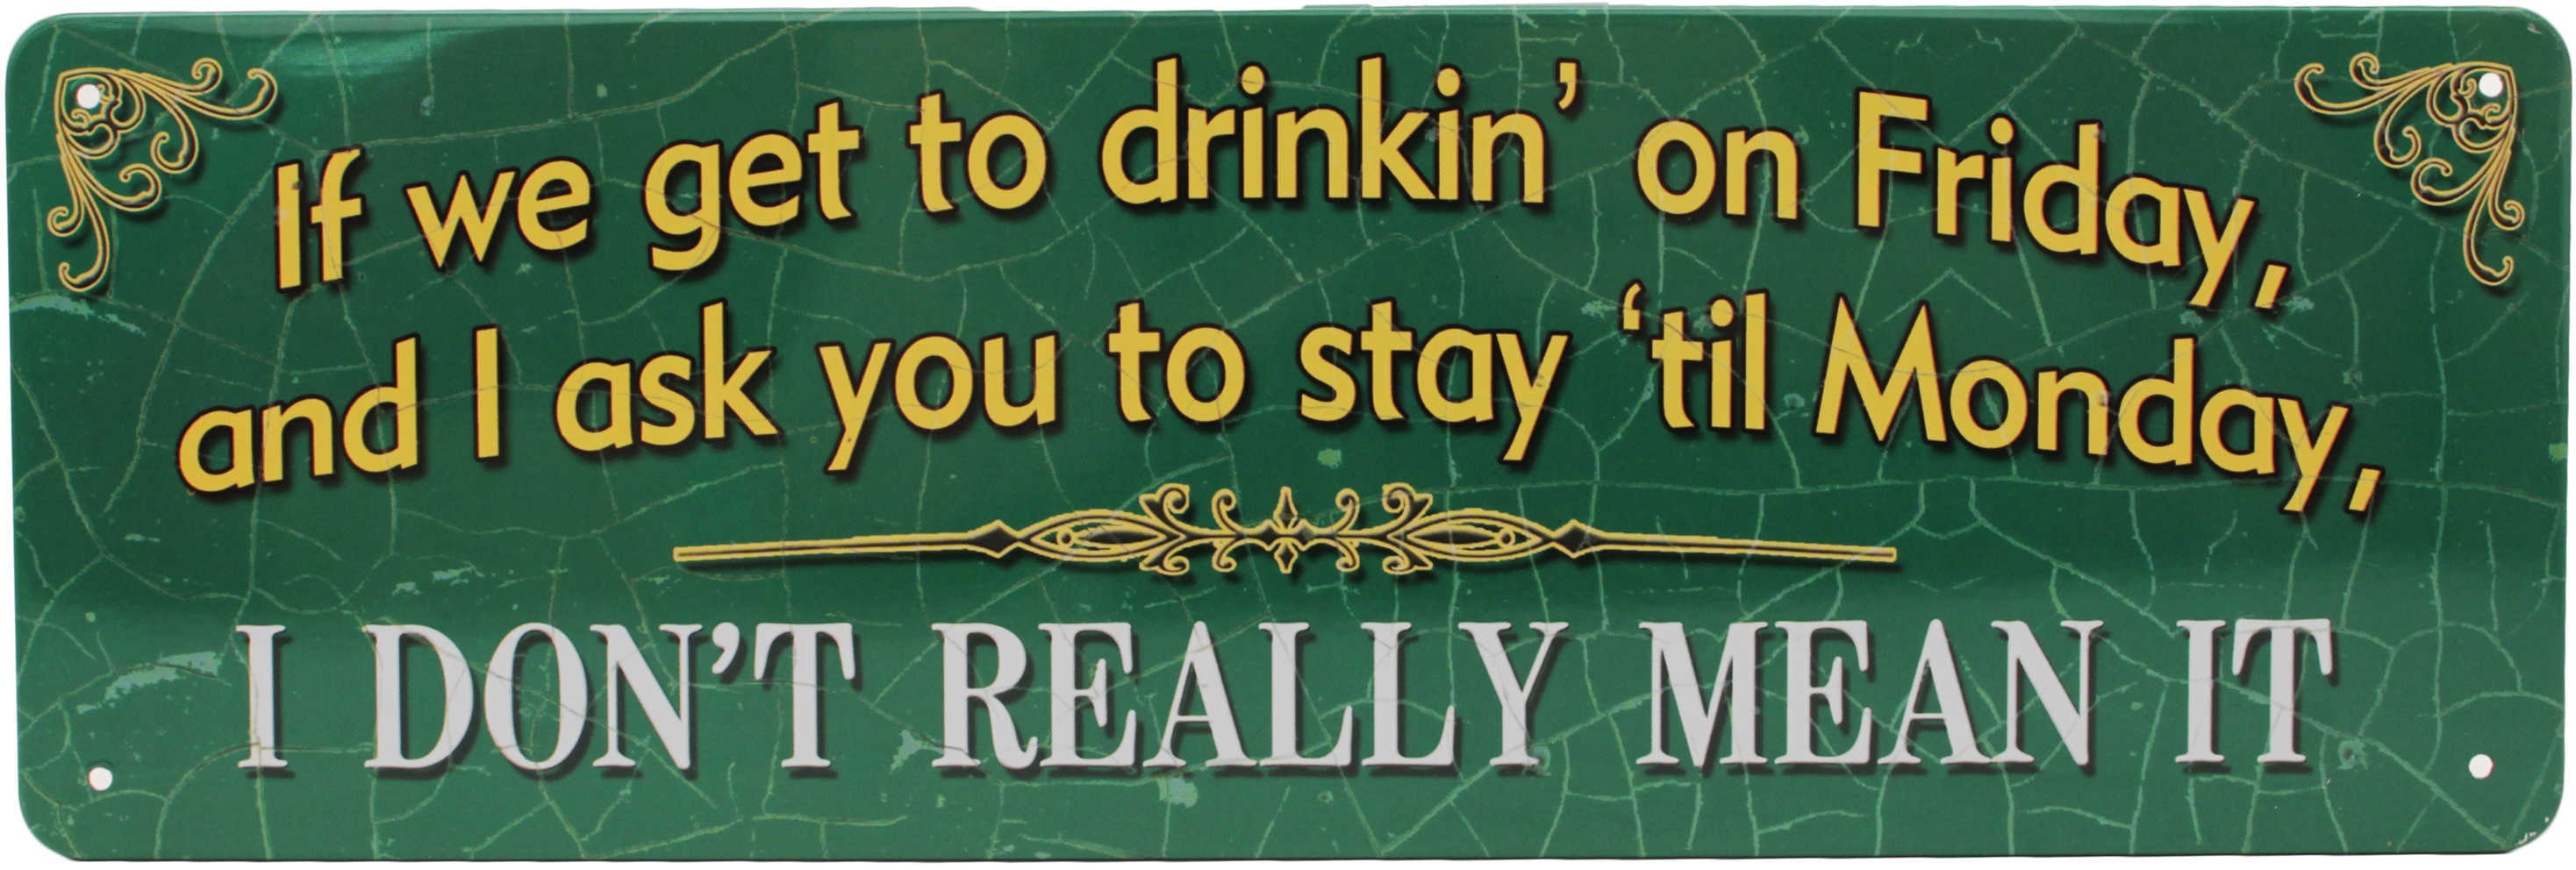 Rivers Edge Products 10.5" x 3.5" Tin Sign If We Get to Drinkin 1414